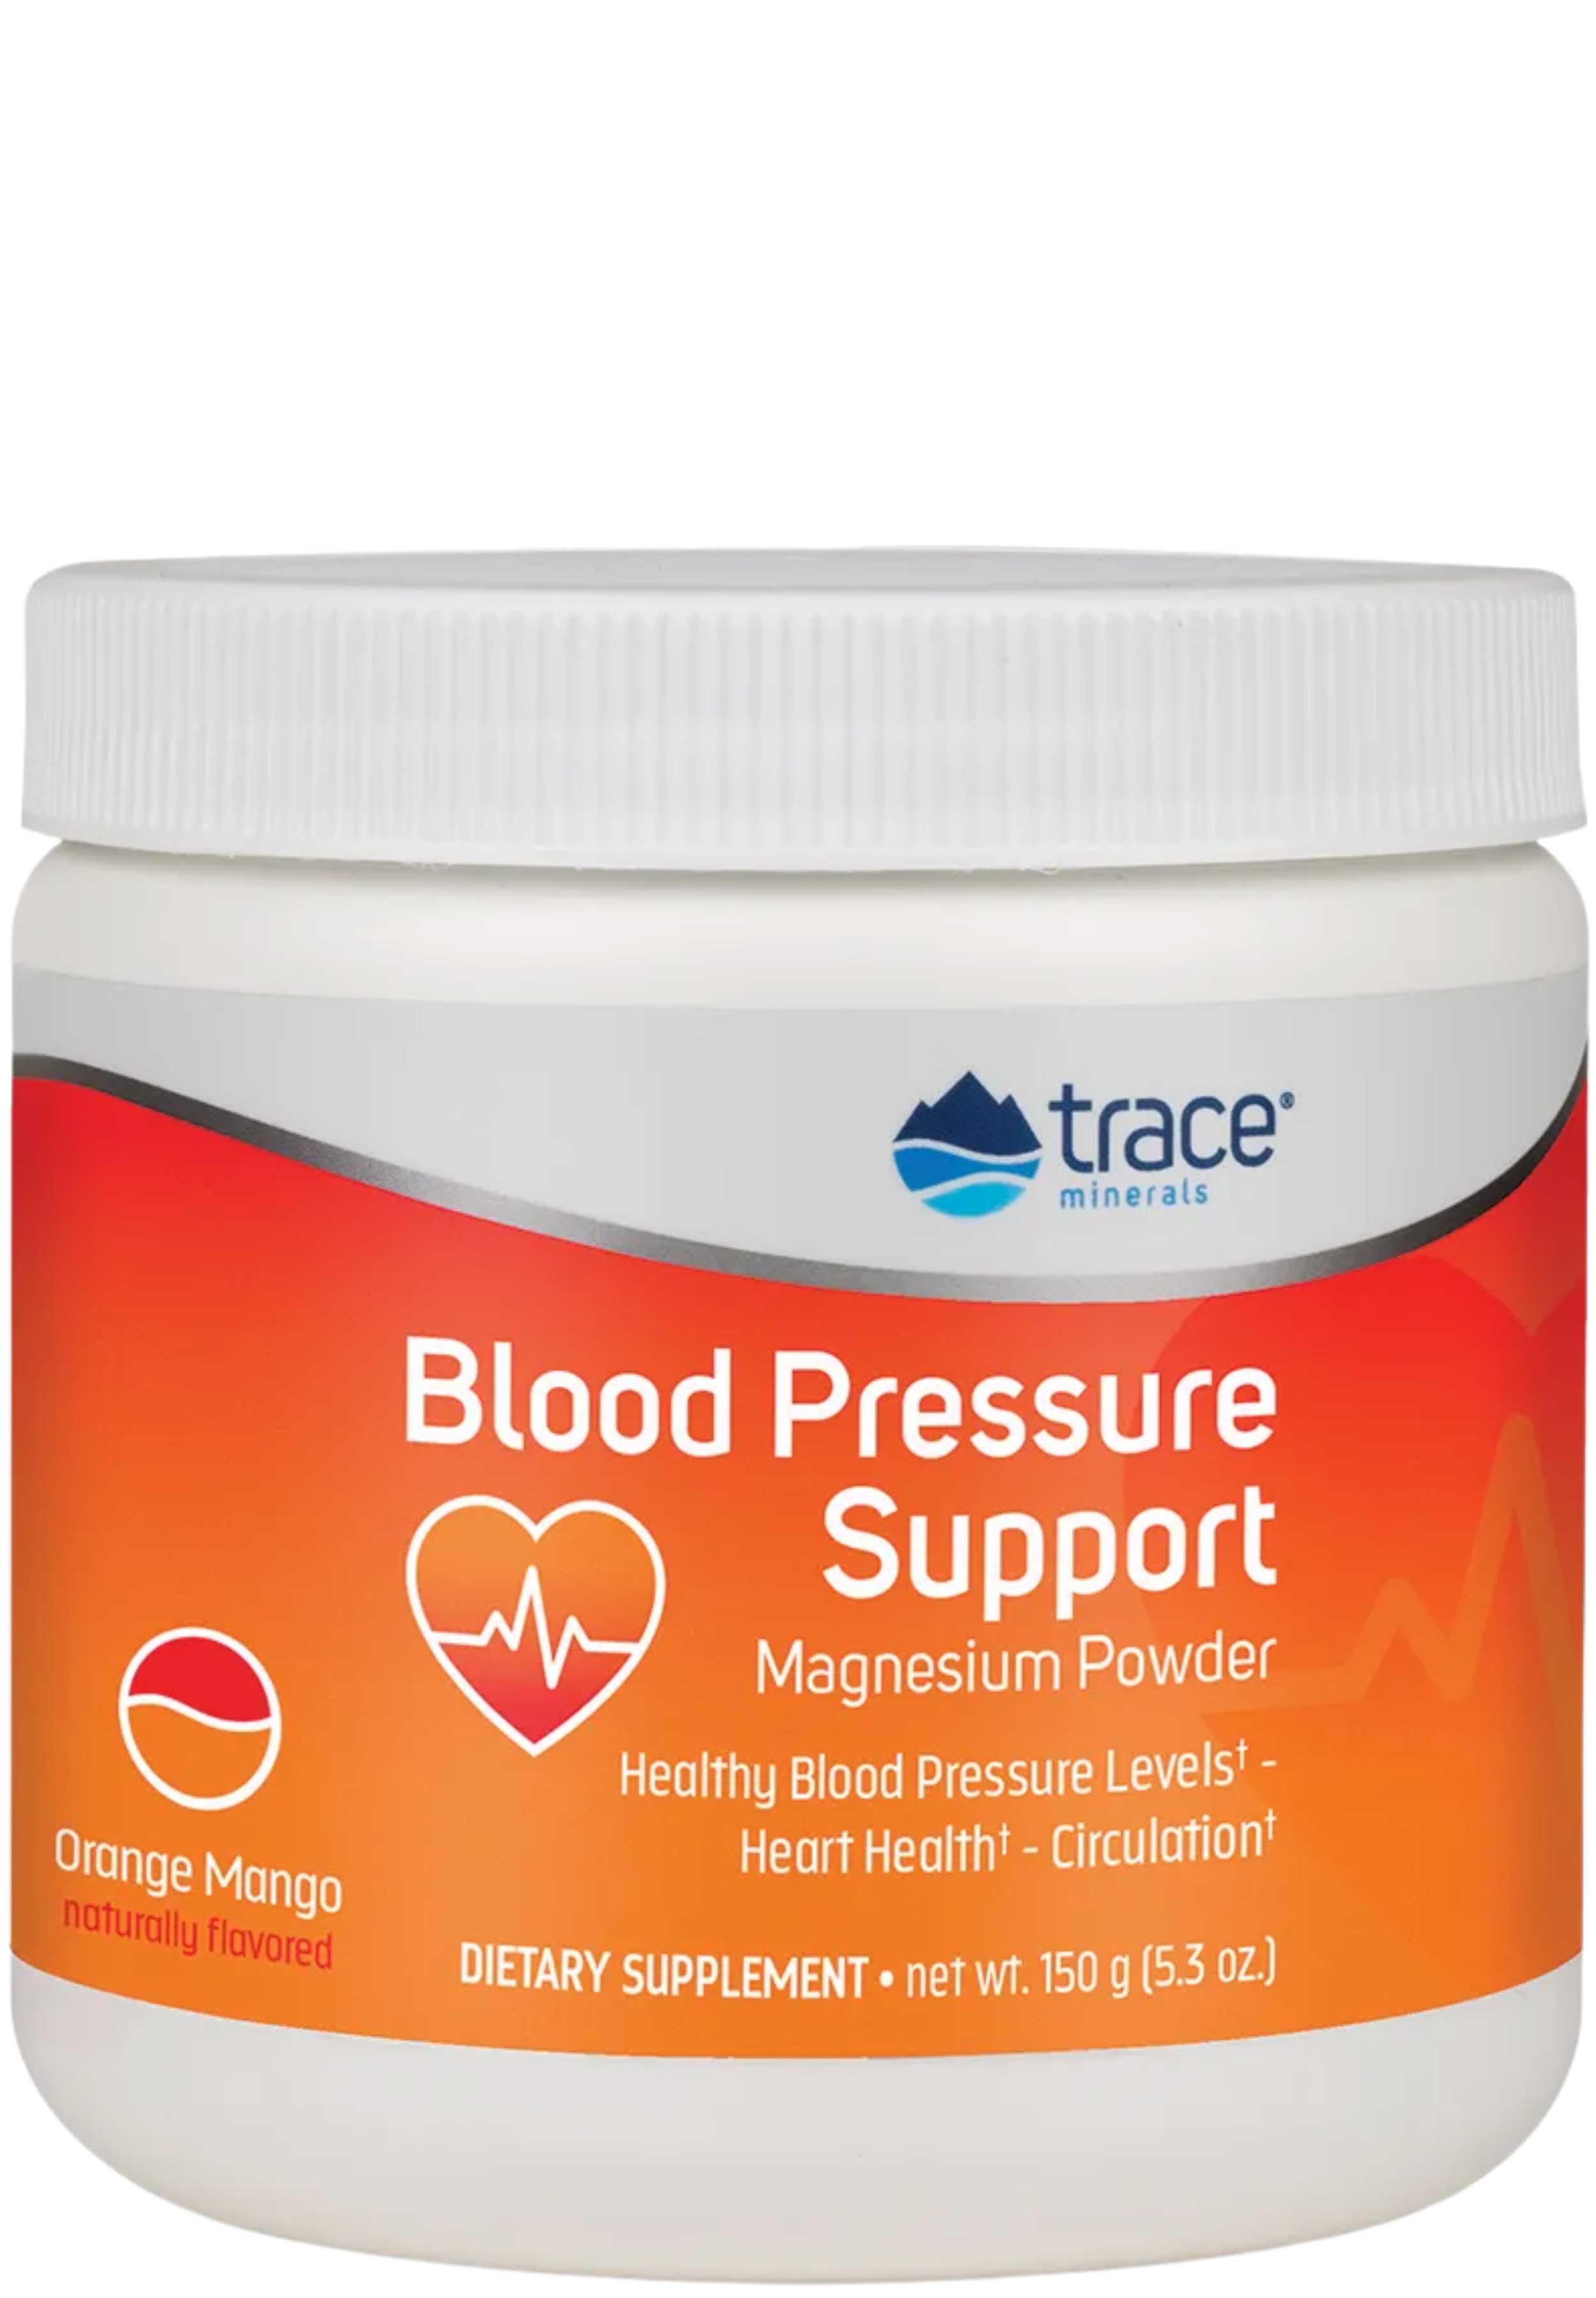 Trace Minerals Research Blood Pressure Support Magnesium Powder